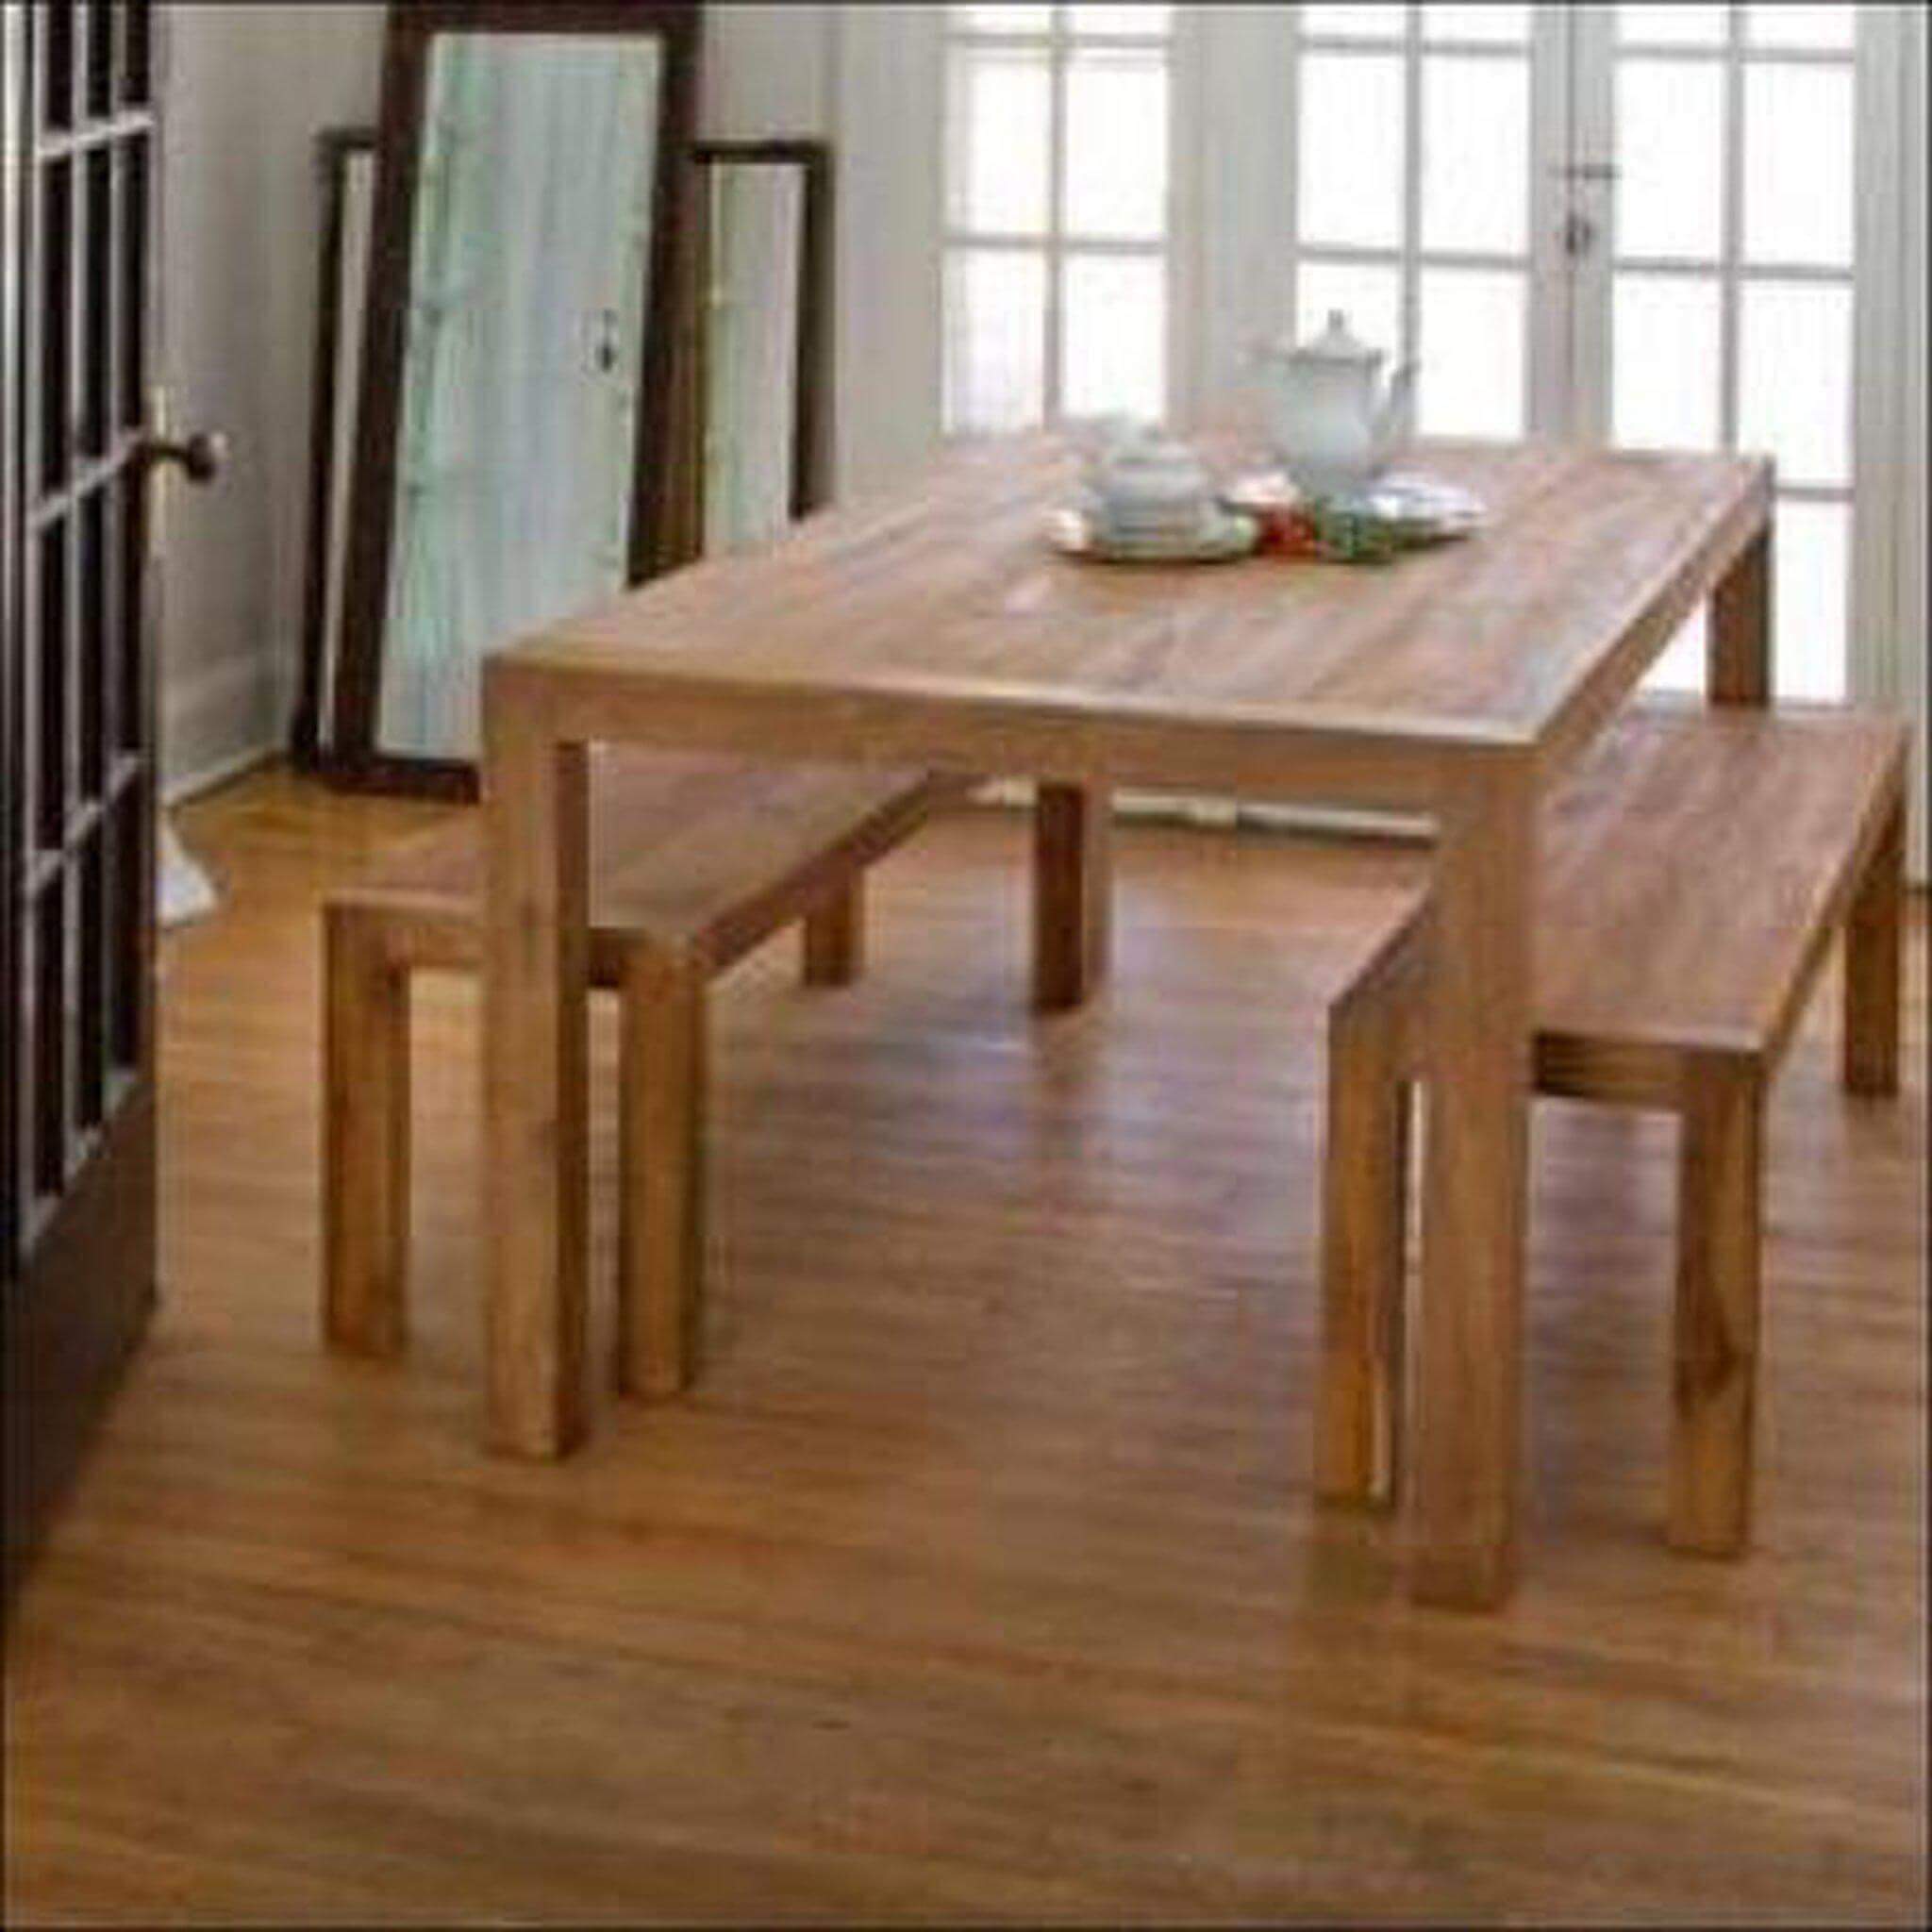 Teak Wood Dining Table Set With 2 Benches TDT-1601 - TimberCraft